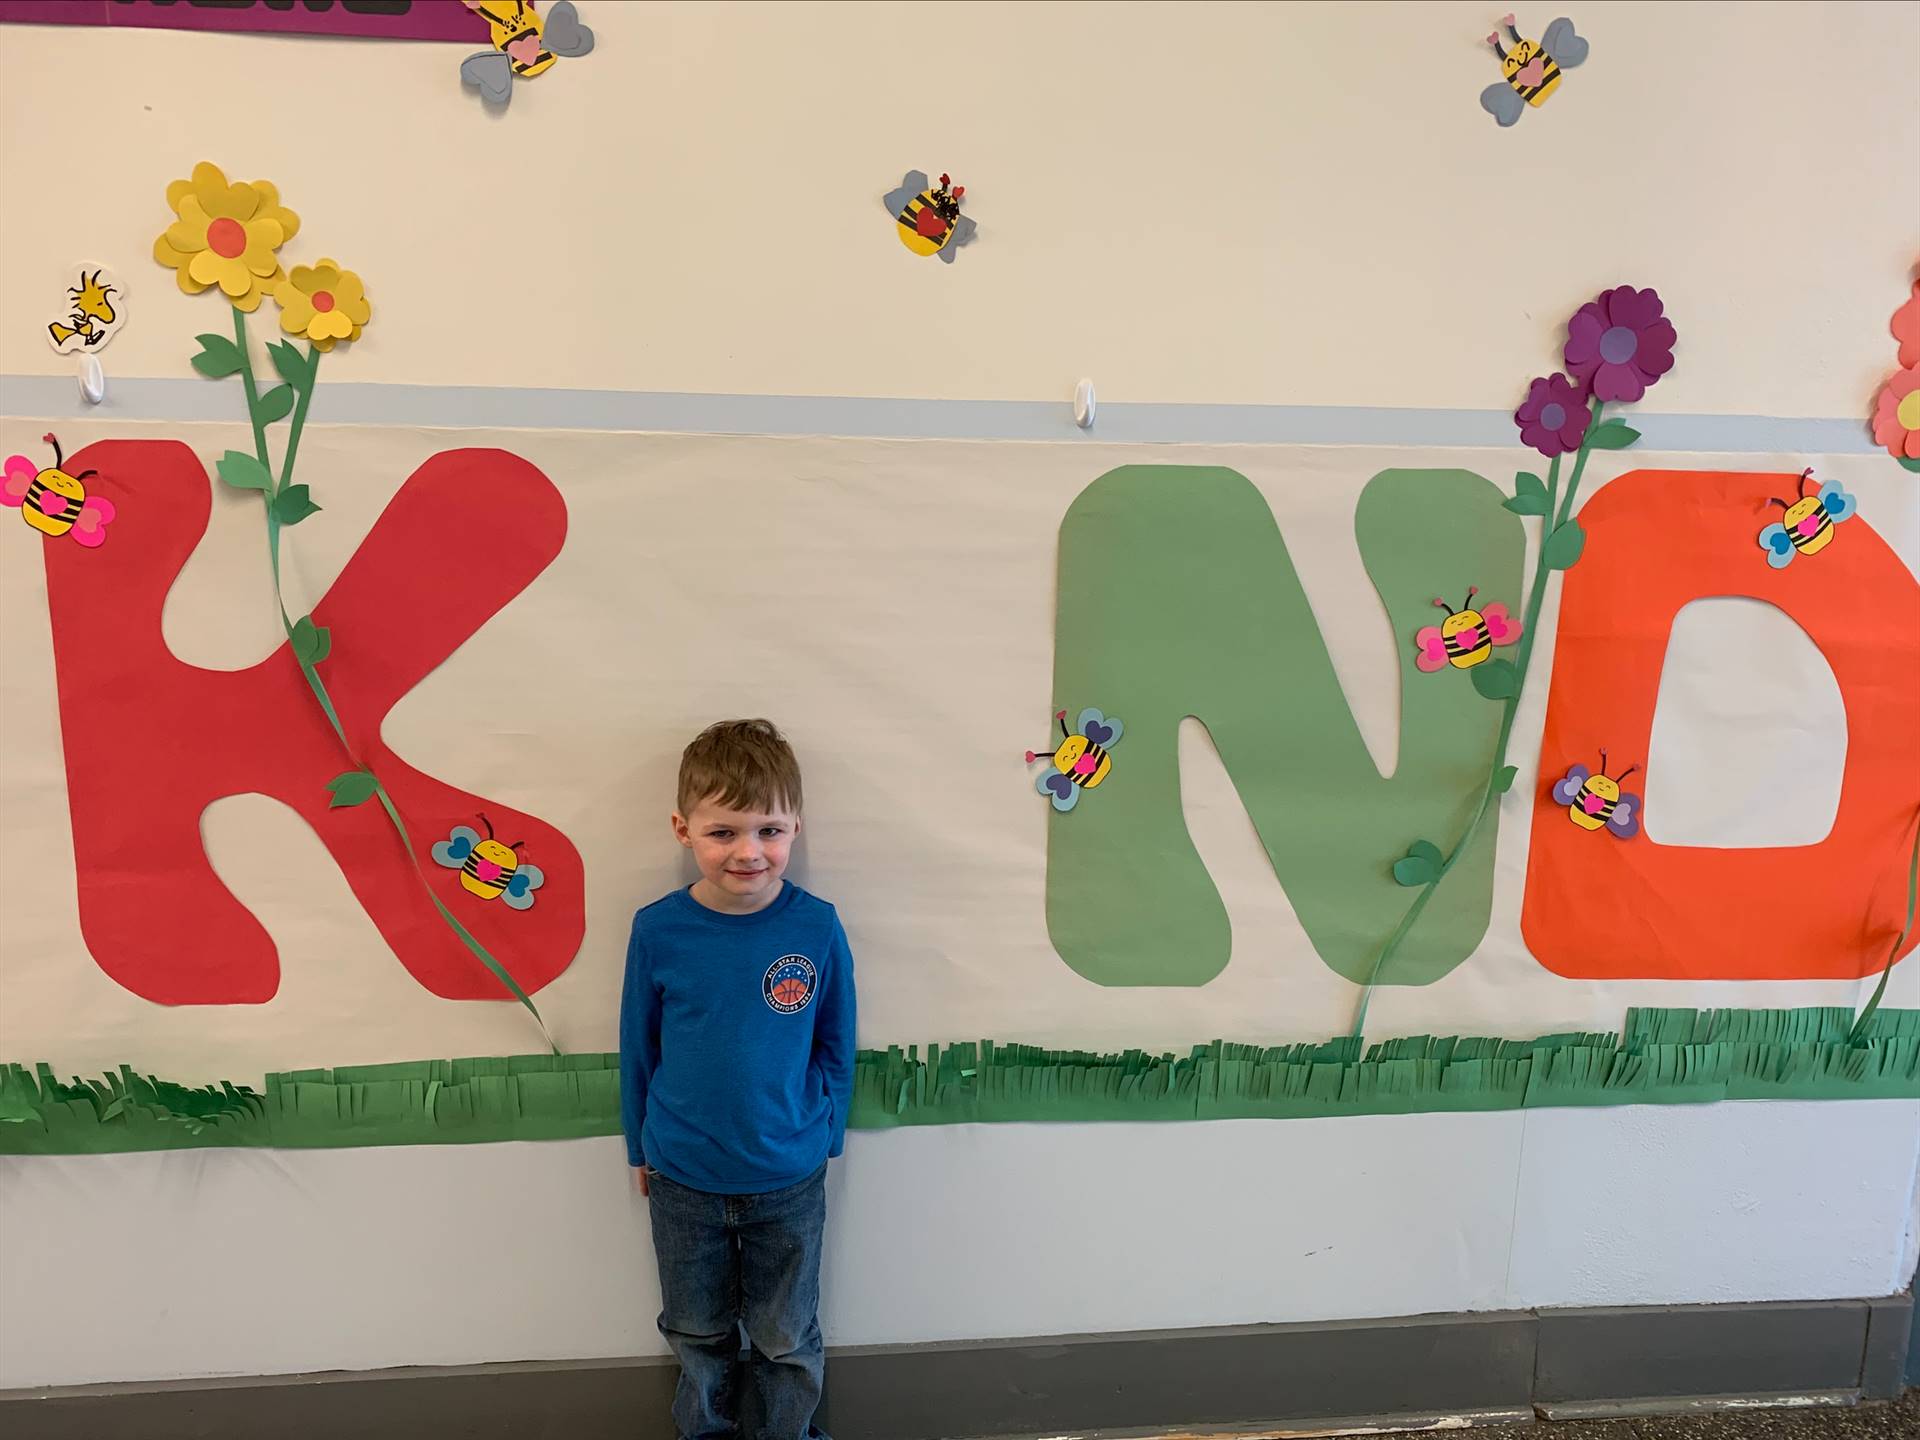 student is "I" in Kind poster